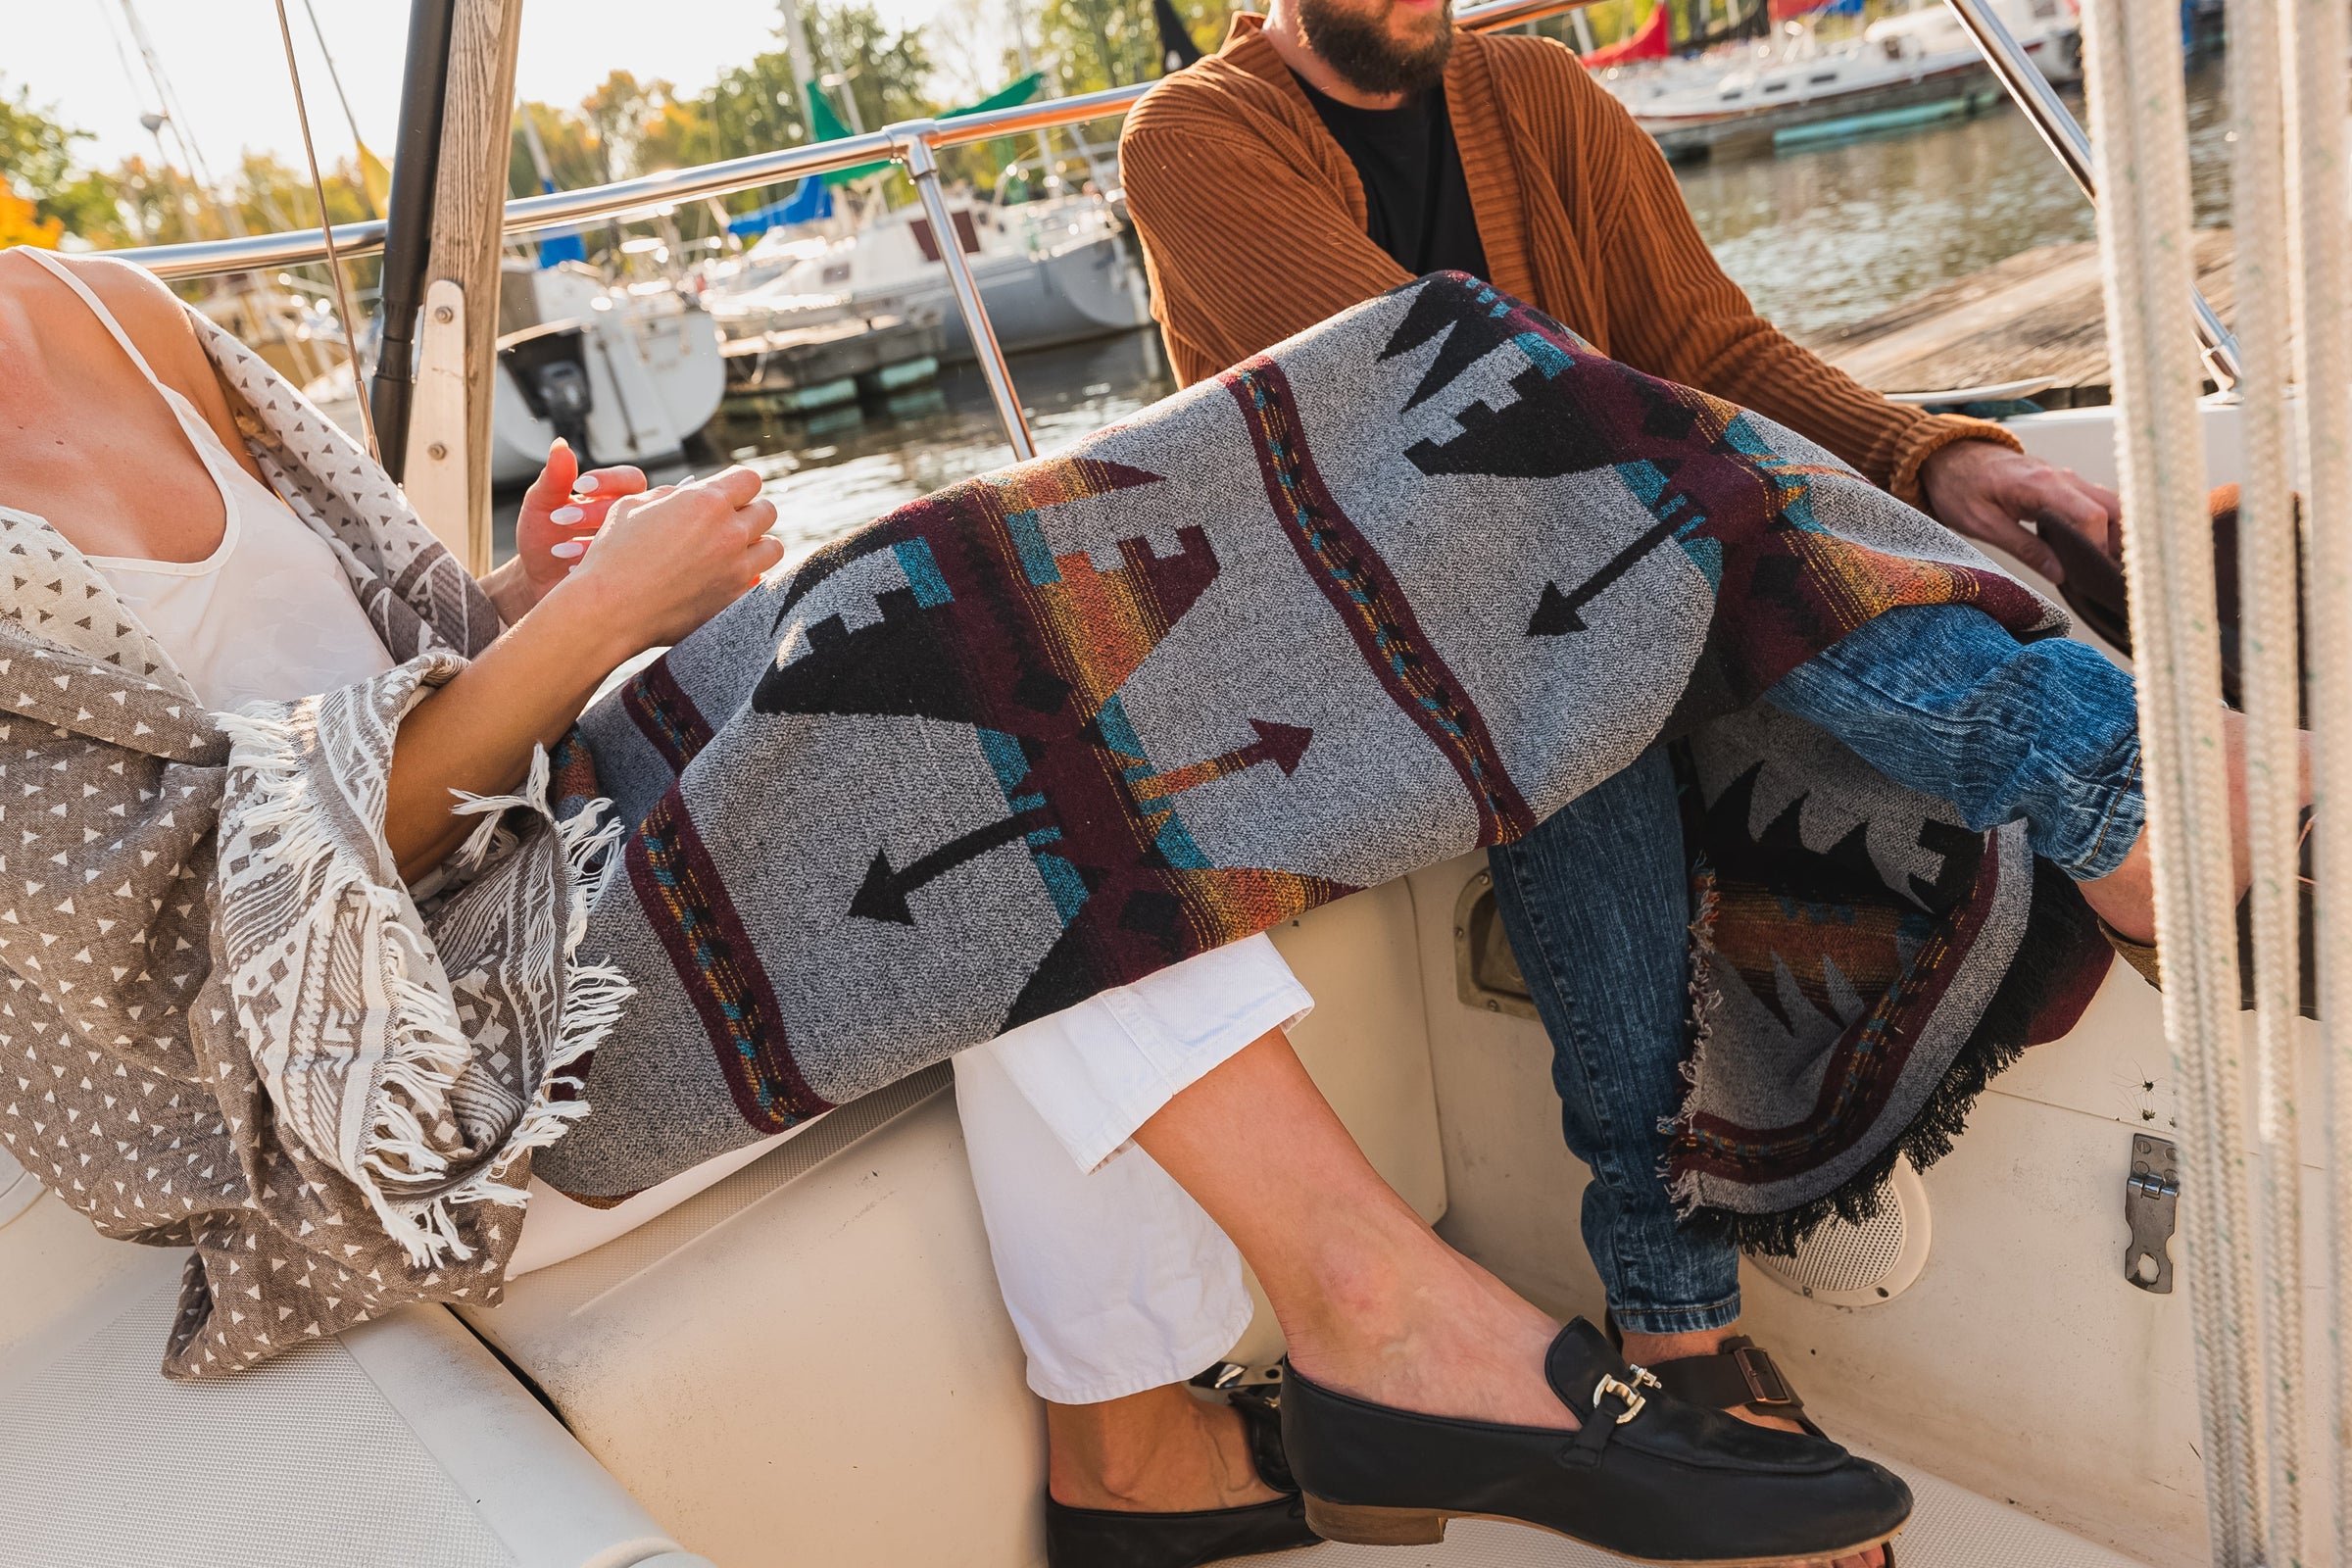 A man and a woman on a boat with a blanket draped over their legs.